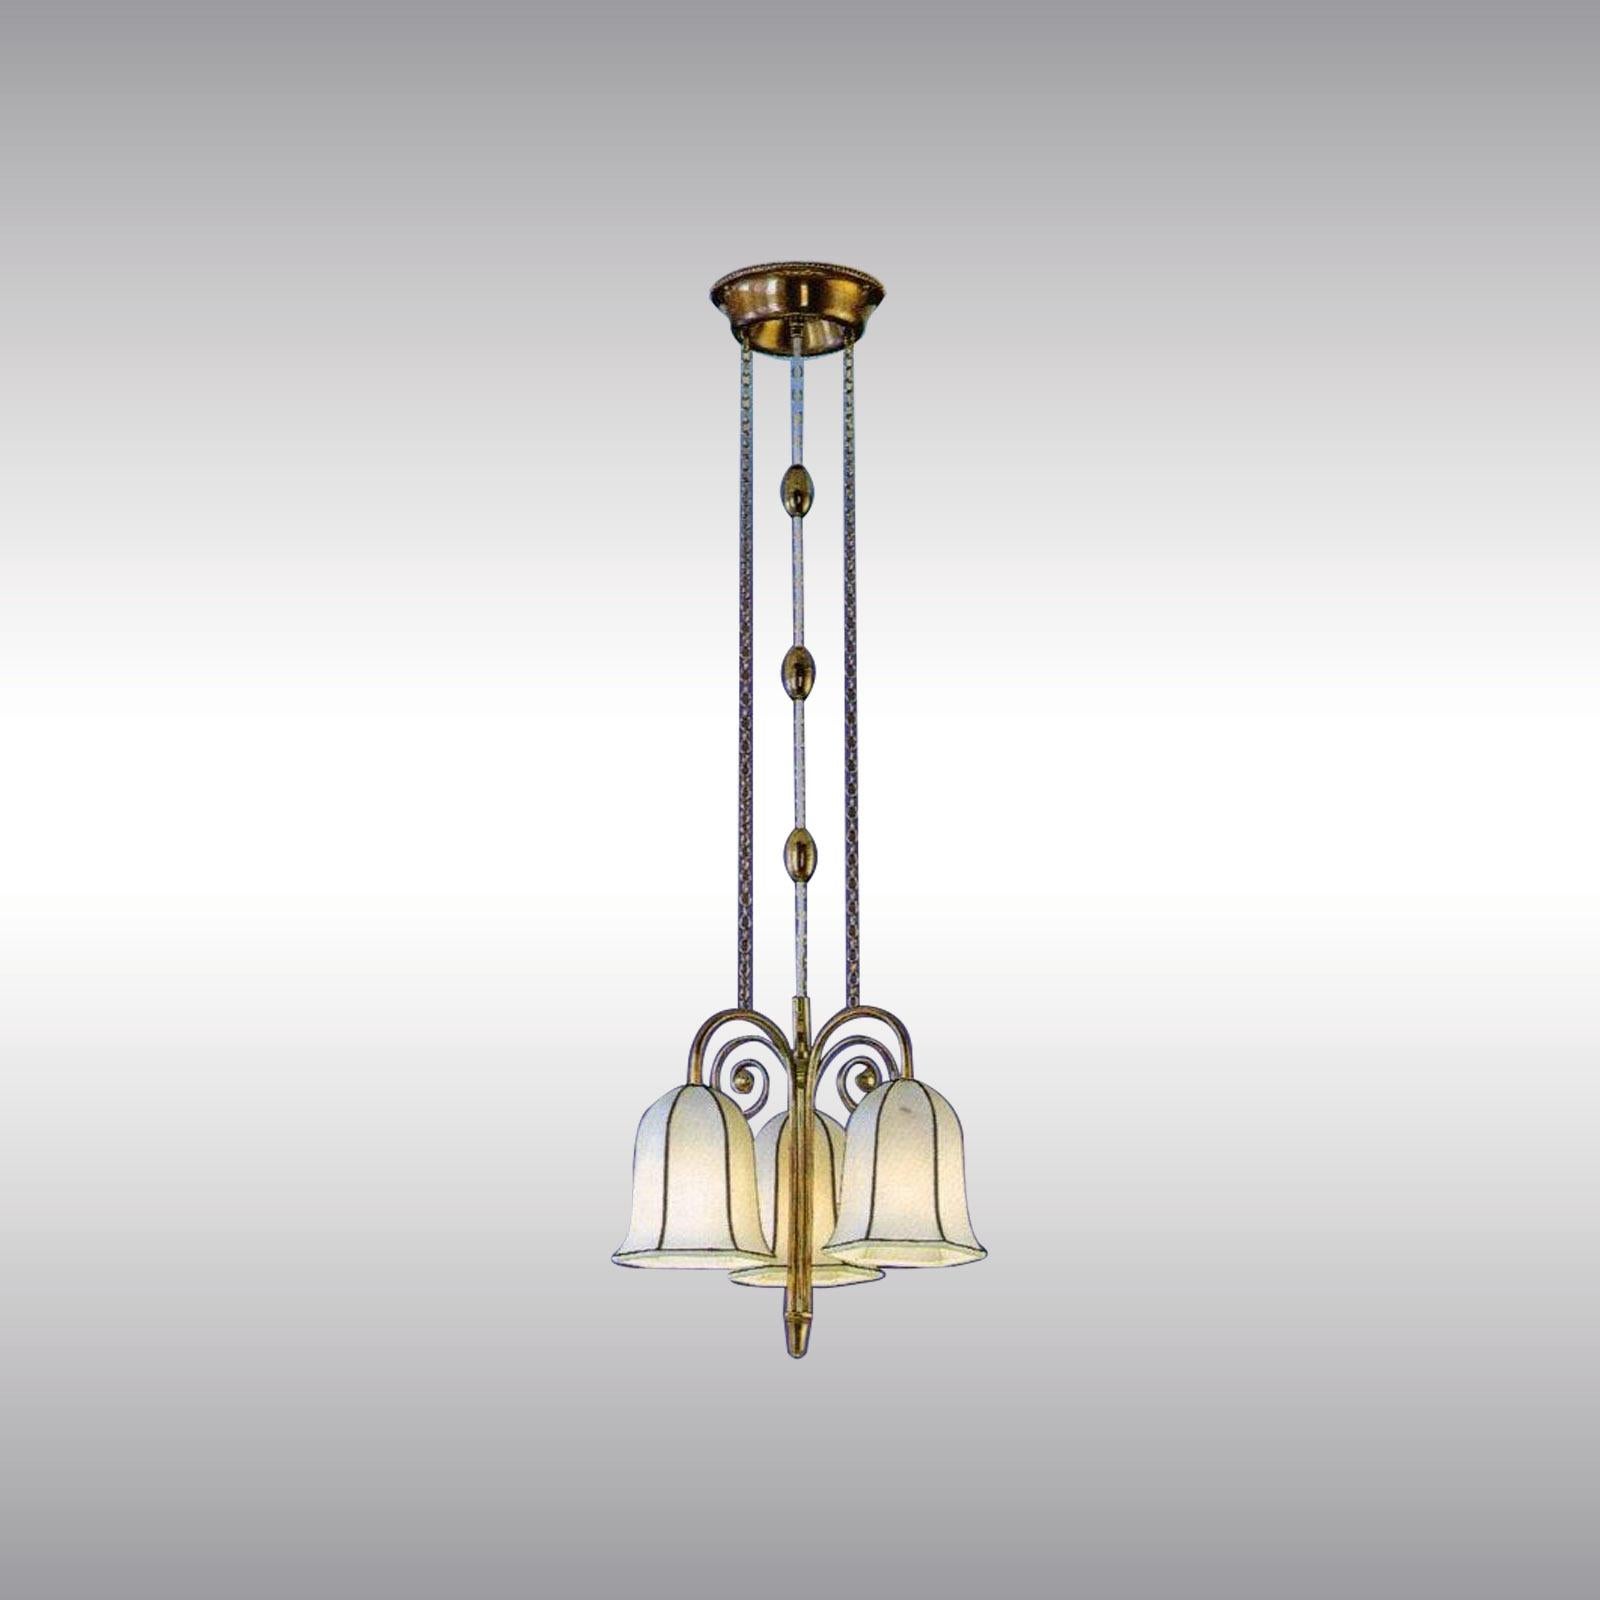 Three-arm chandelier with fabric shades. The given length is just the chandelier with no chain, the total drop is custom-made. WW-Archiv, MAK M1652.
Originally manufactured at the Wiener Werkstaette Atelier, now custom-made production at the Woka